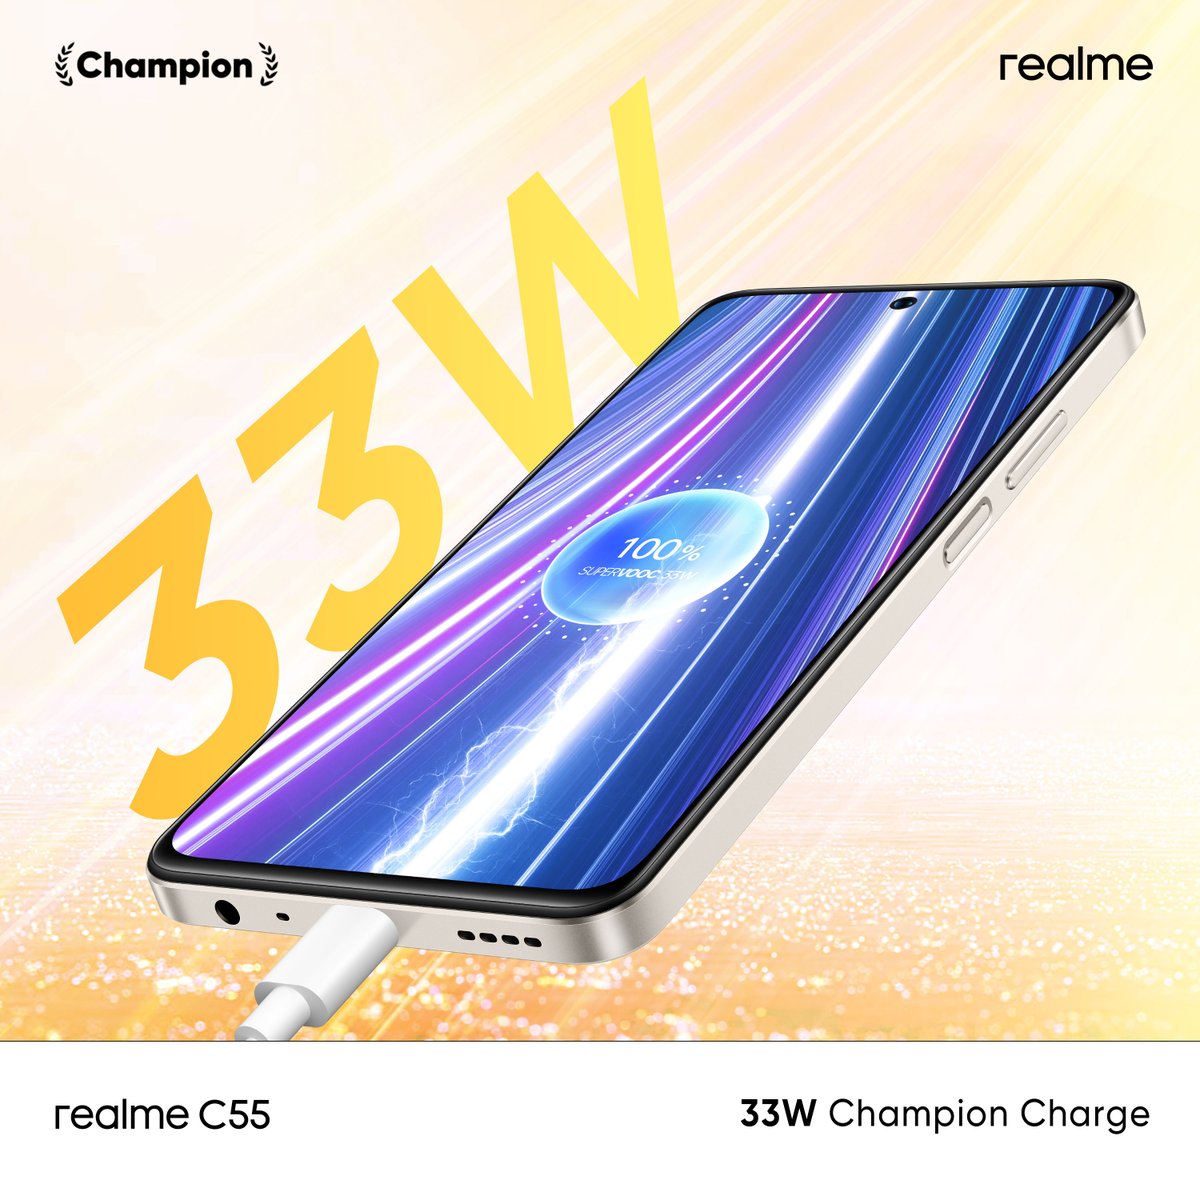 Recharge at lightning speed with 33W SuperVOOC Charge on the realme C55! ⚡️🔋 #realmeC55 #ChampionCamera #ChampionMemory #ChampionCharge